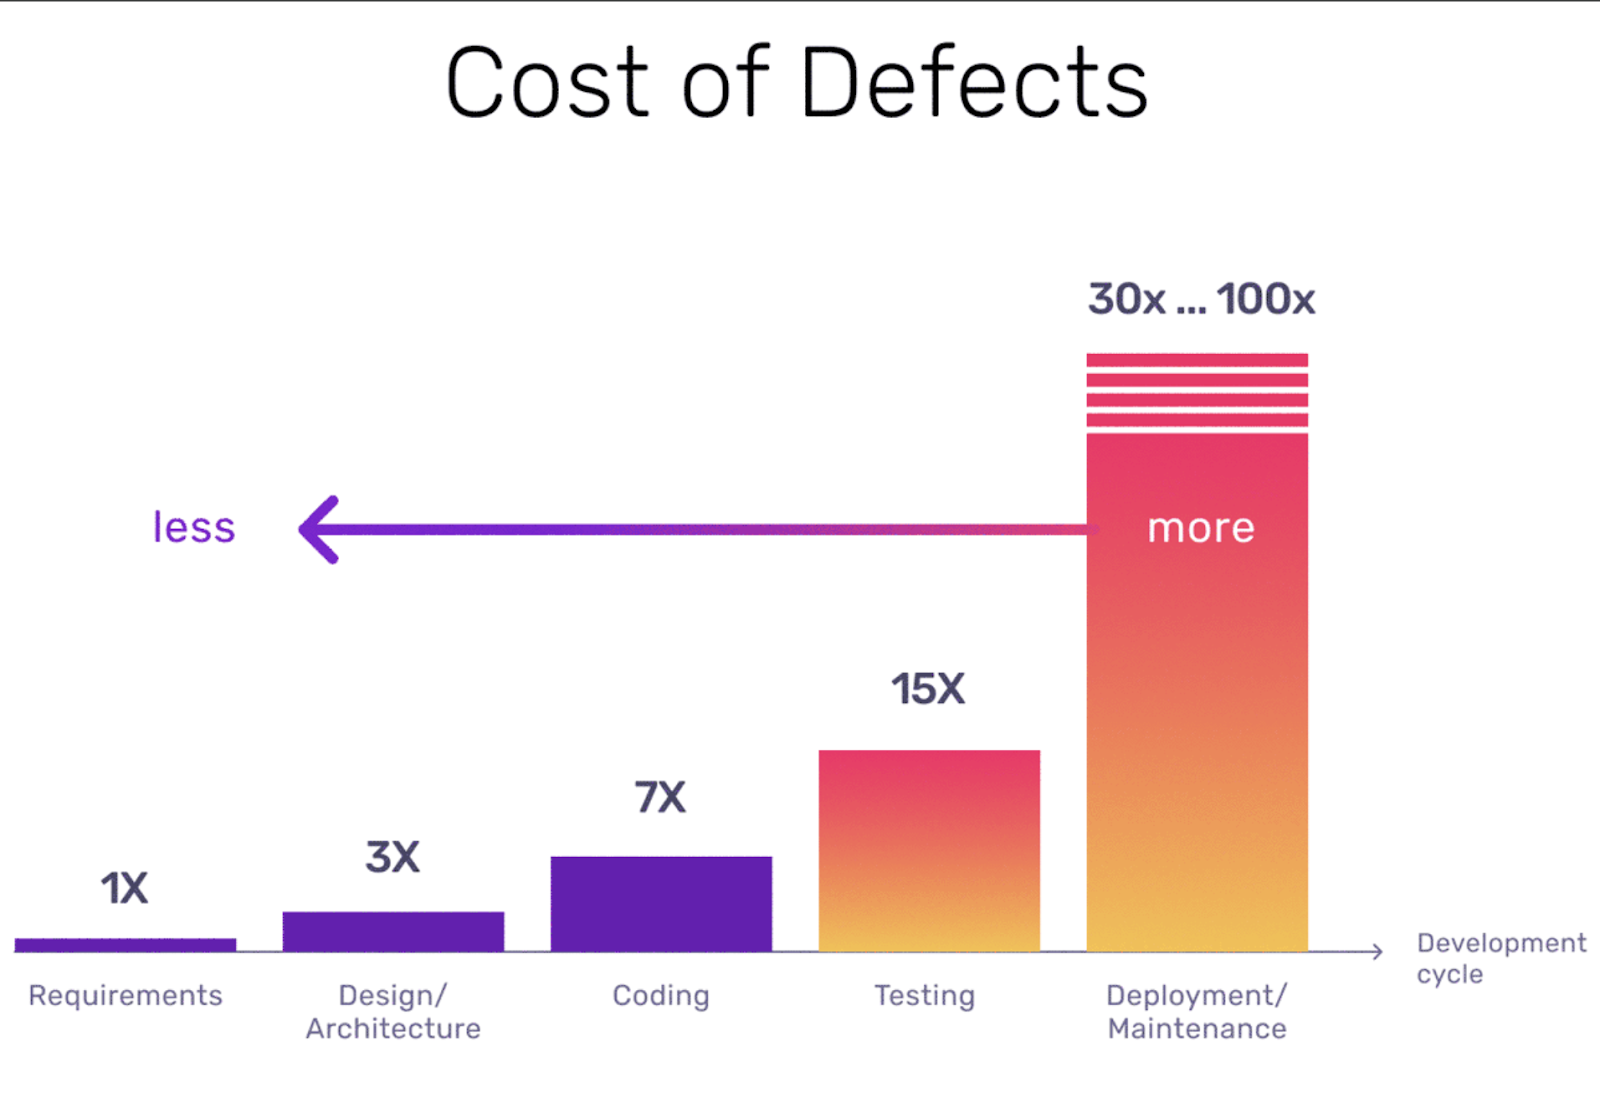 The cost of finding bugs